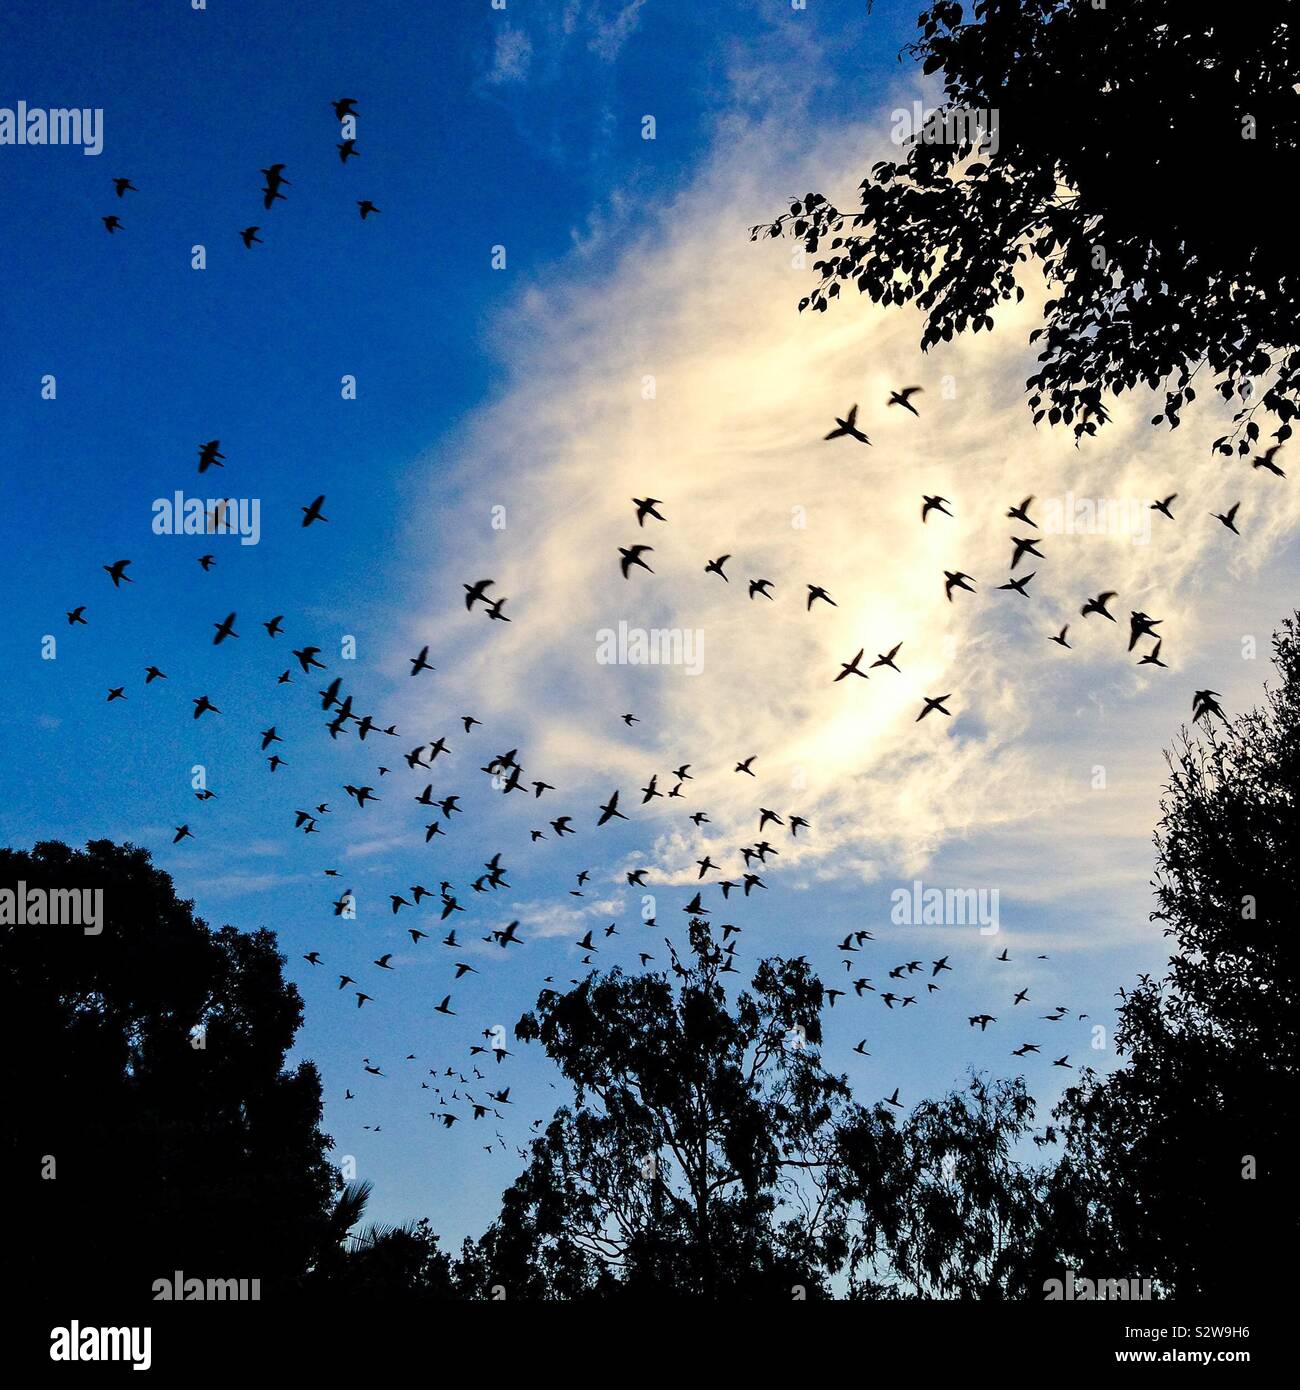 Birds flying free are black silhouettes against bright clouds in a late afternoon blue sky Stock Photo